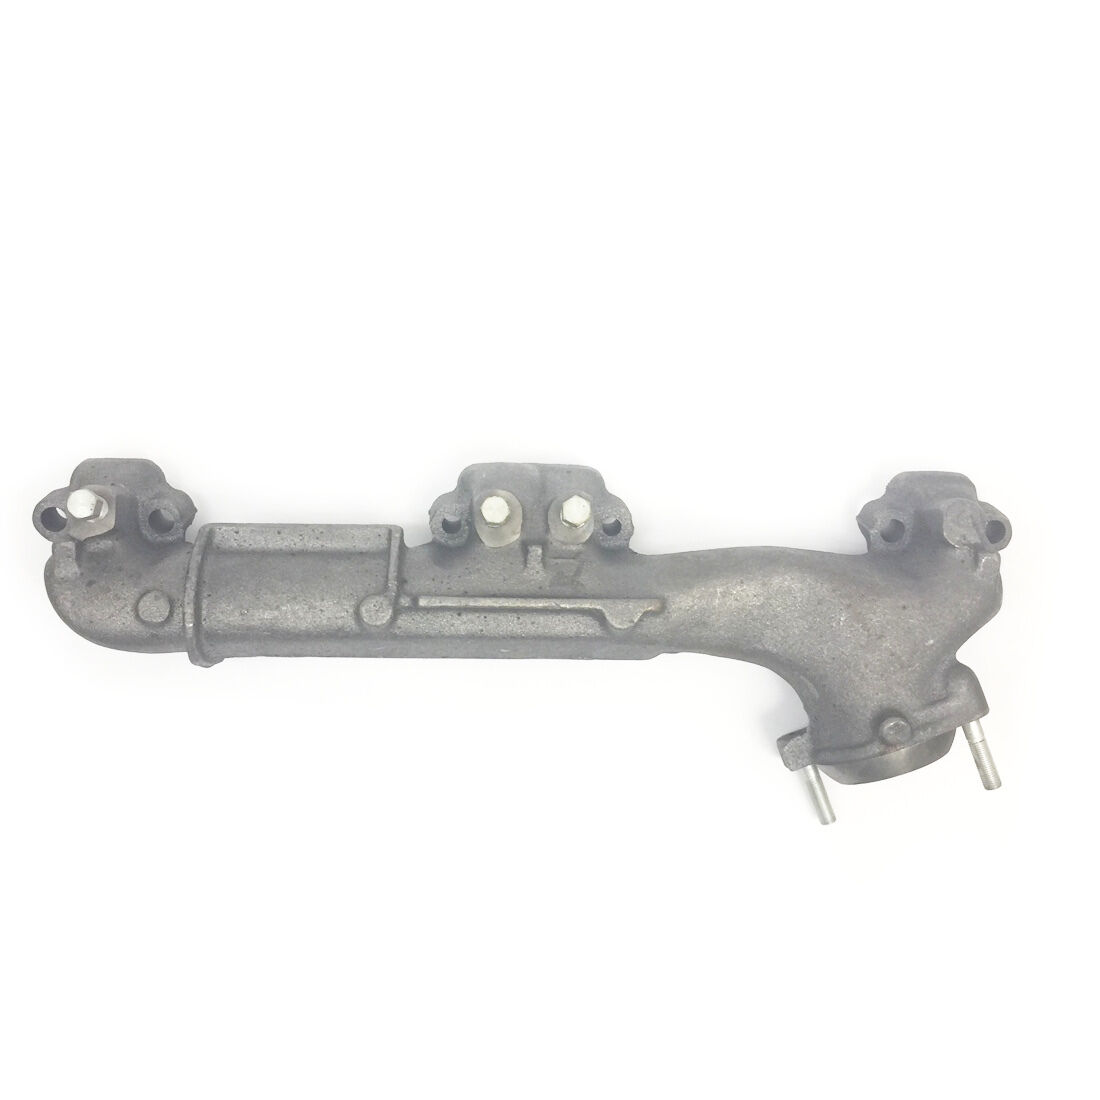 Driver's Side Exhaust Manifold 5.9L/360 1978-1979 AMC PACER